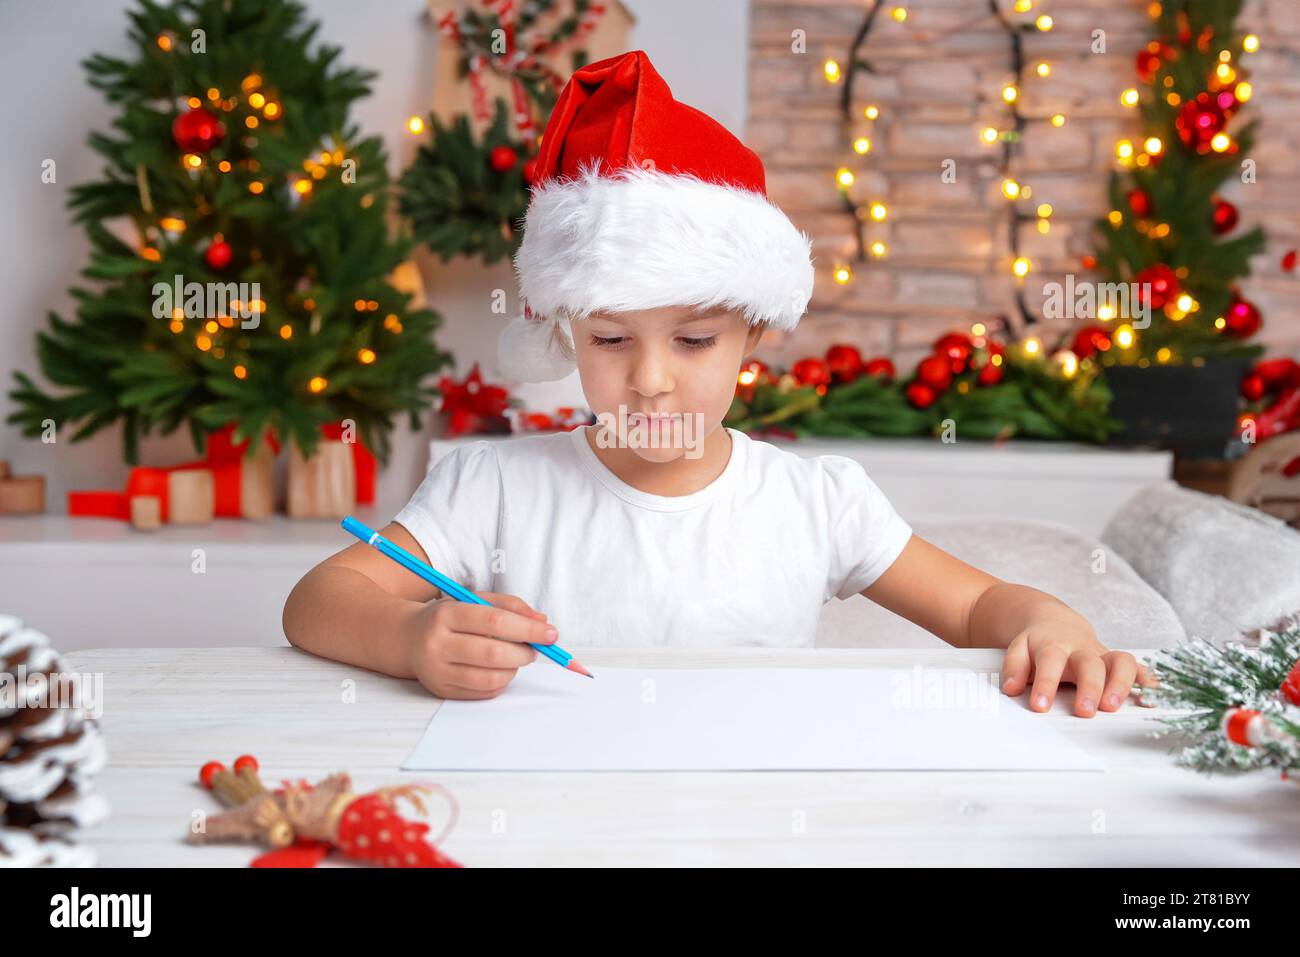 Girl in Christmas hat drawing and writing on blank paper, festive background with Christmas trees, lights, and decorations. Creative holiday Stock Photo